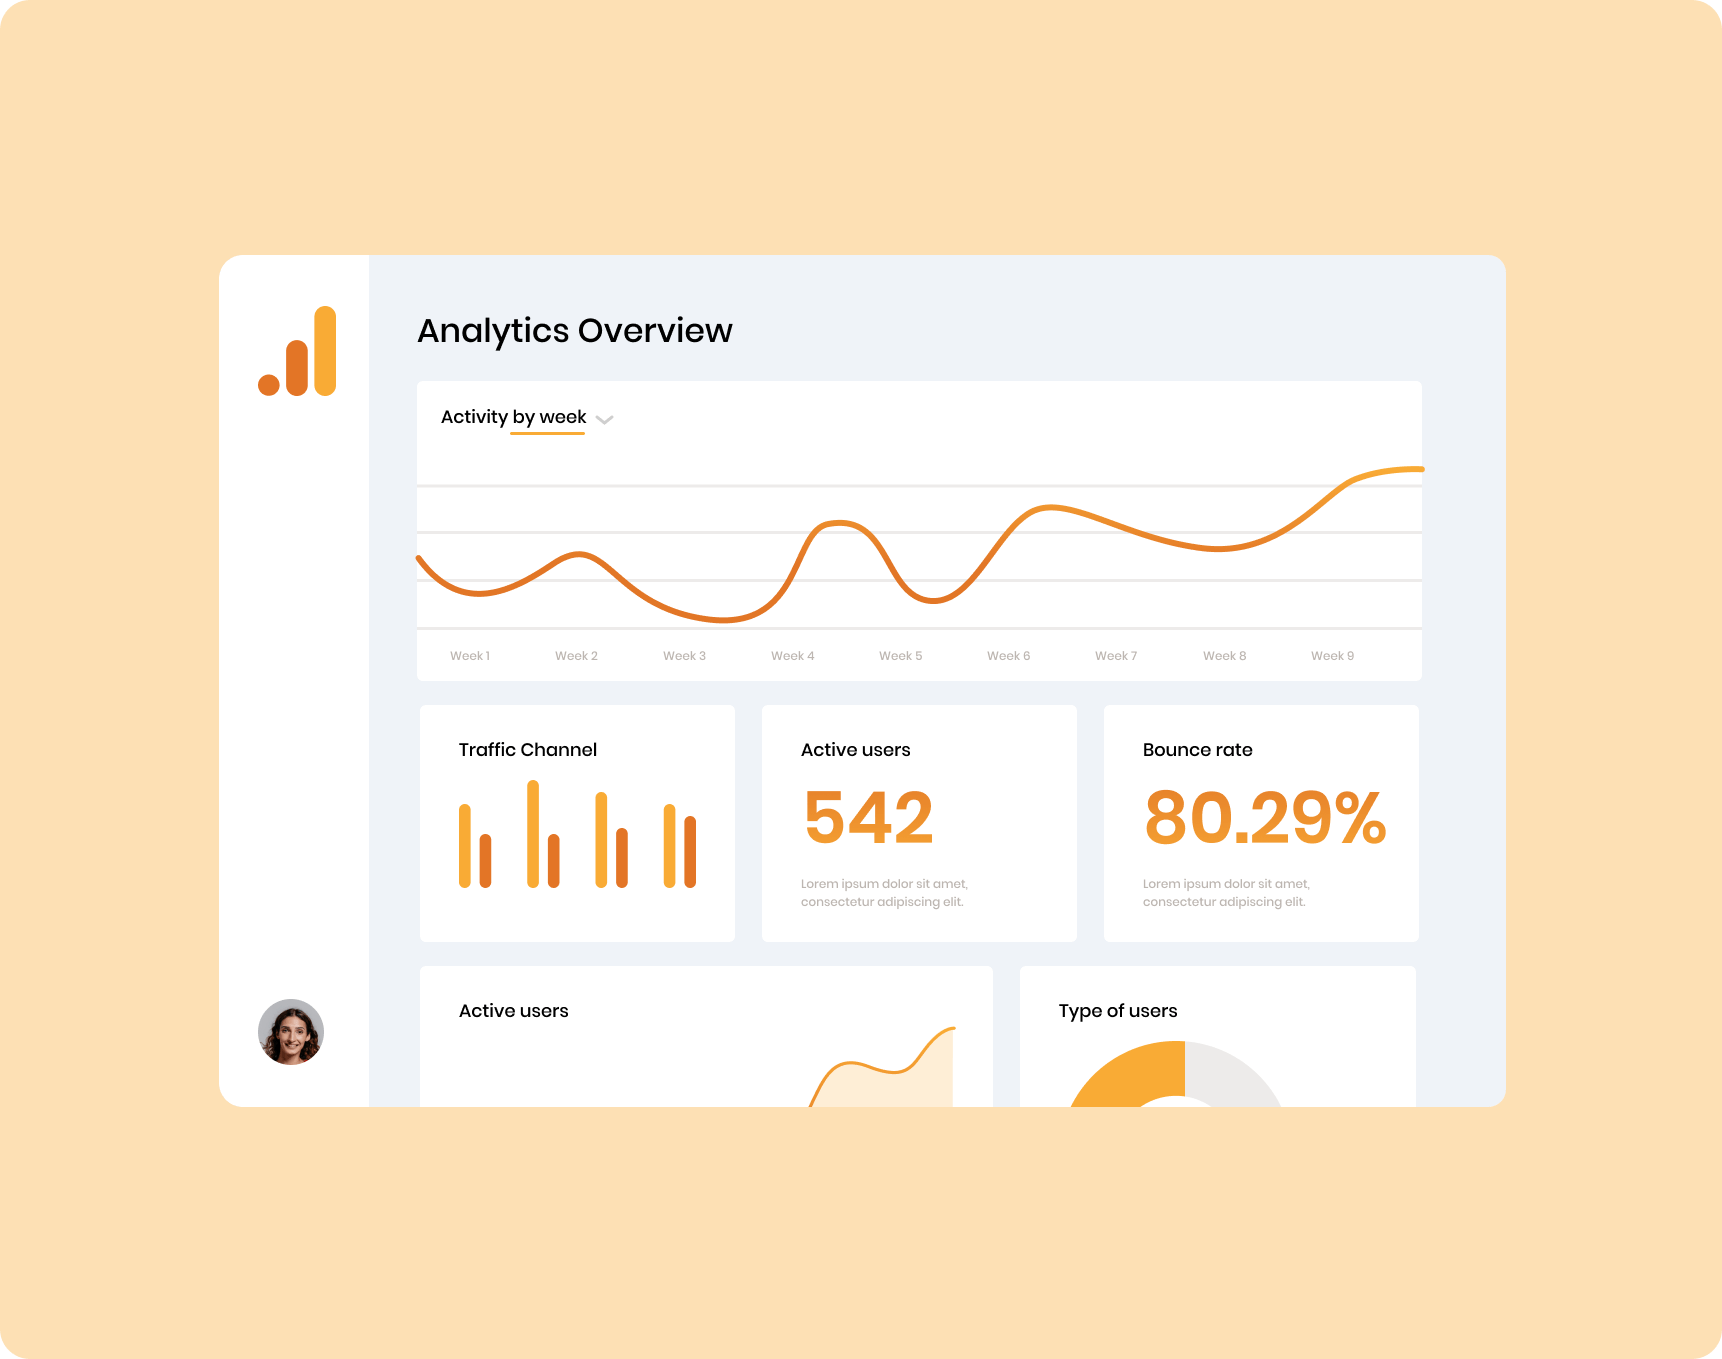 an analytics overview page shows a graph showing the number of active users